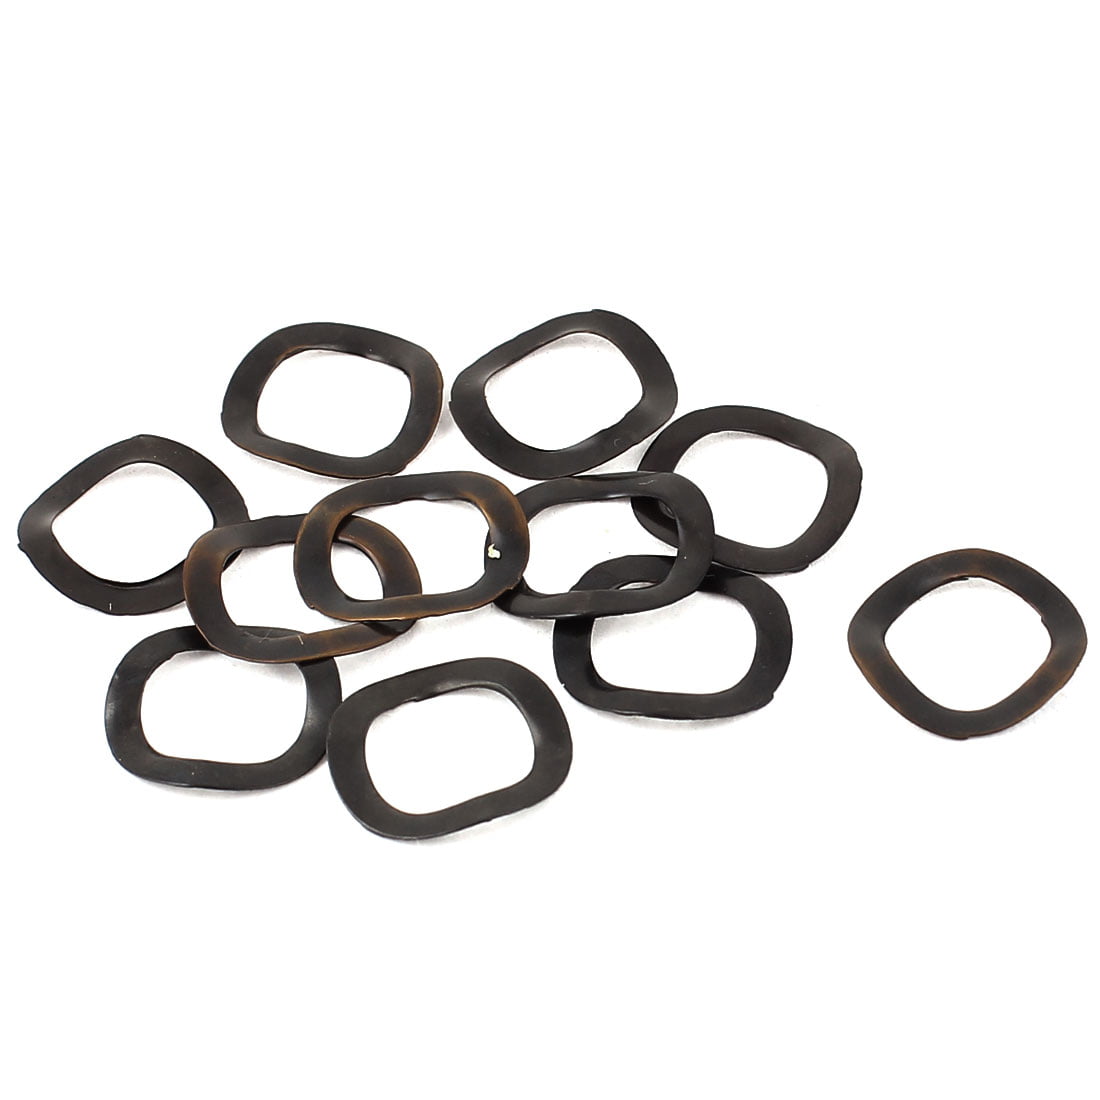 10 Pieces Black Metal Wave Crinkle Spring Washer 14mm x 21mm x 0.3mm 